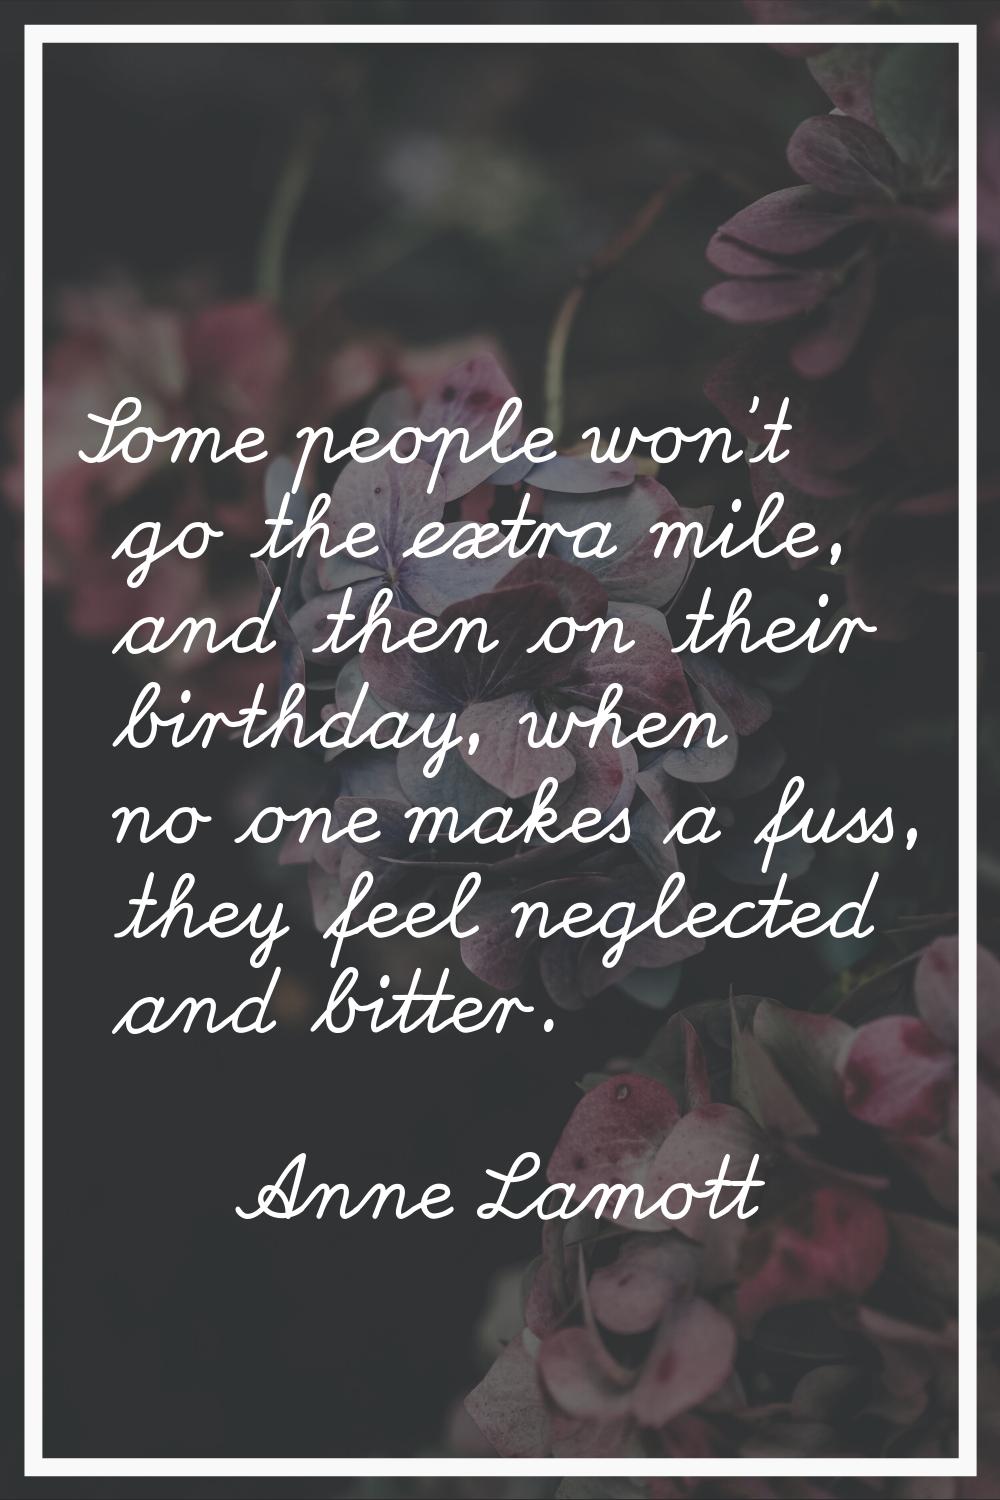 Some people won't go the extra mile, and then on their birthday, when no one makes a fuss, they fee